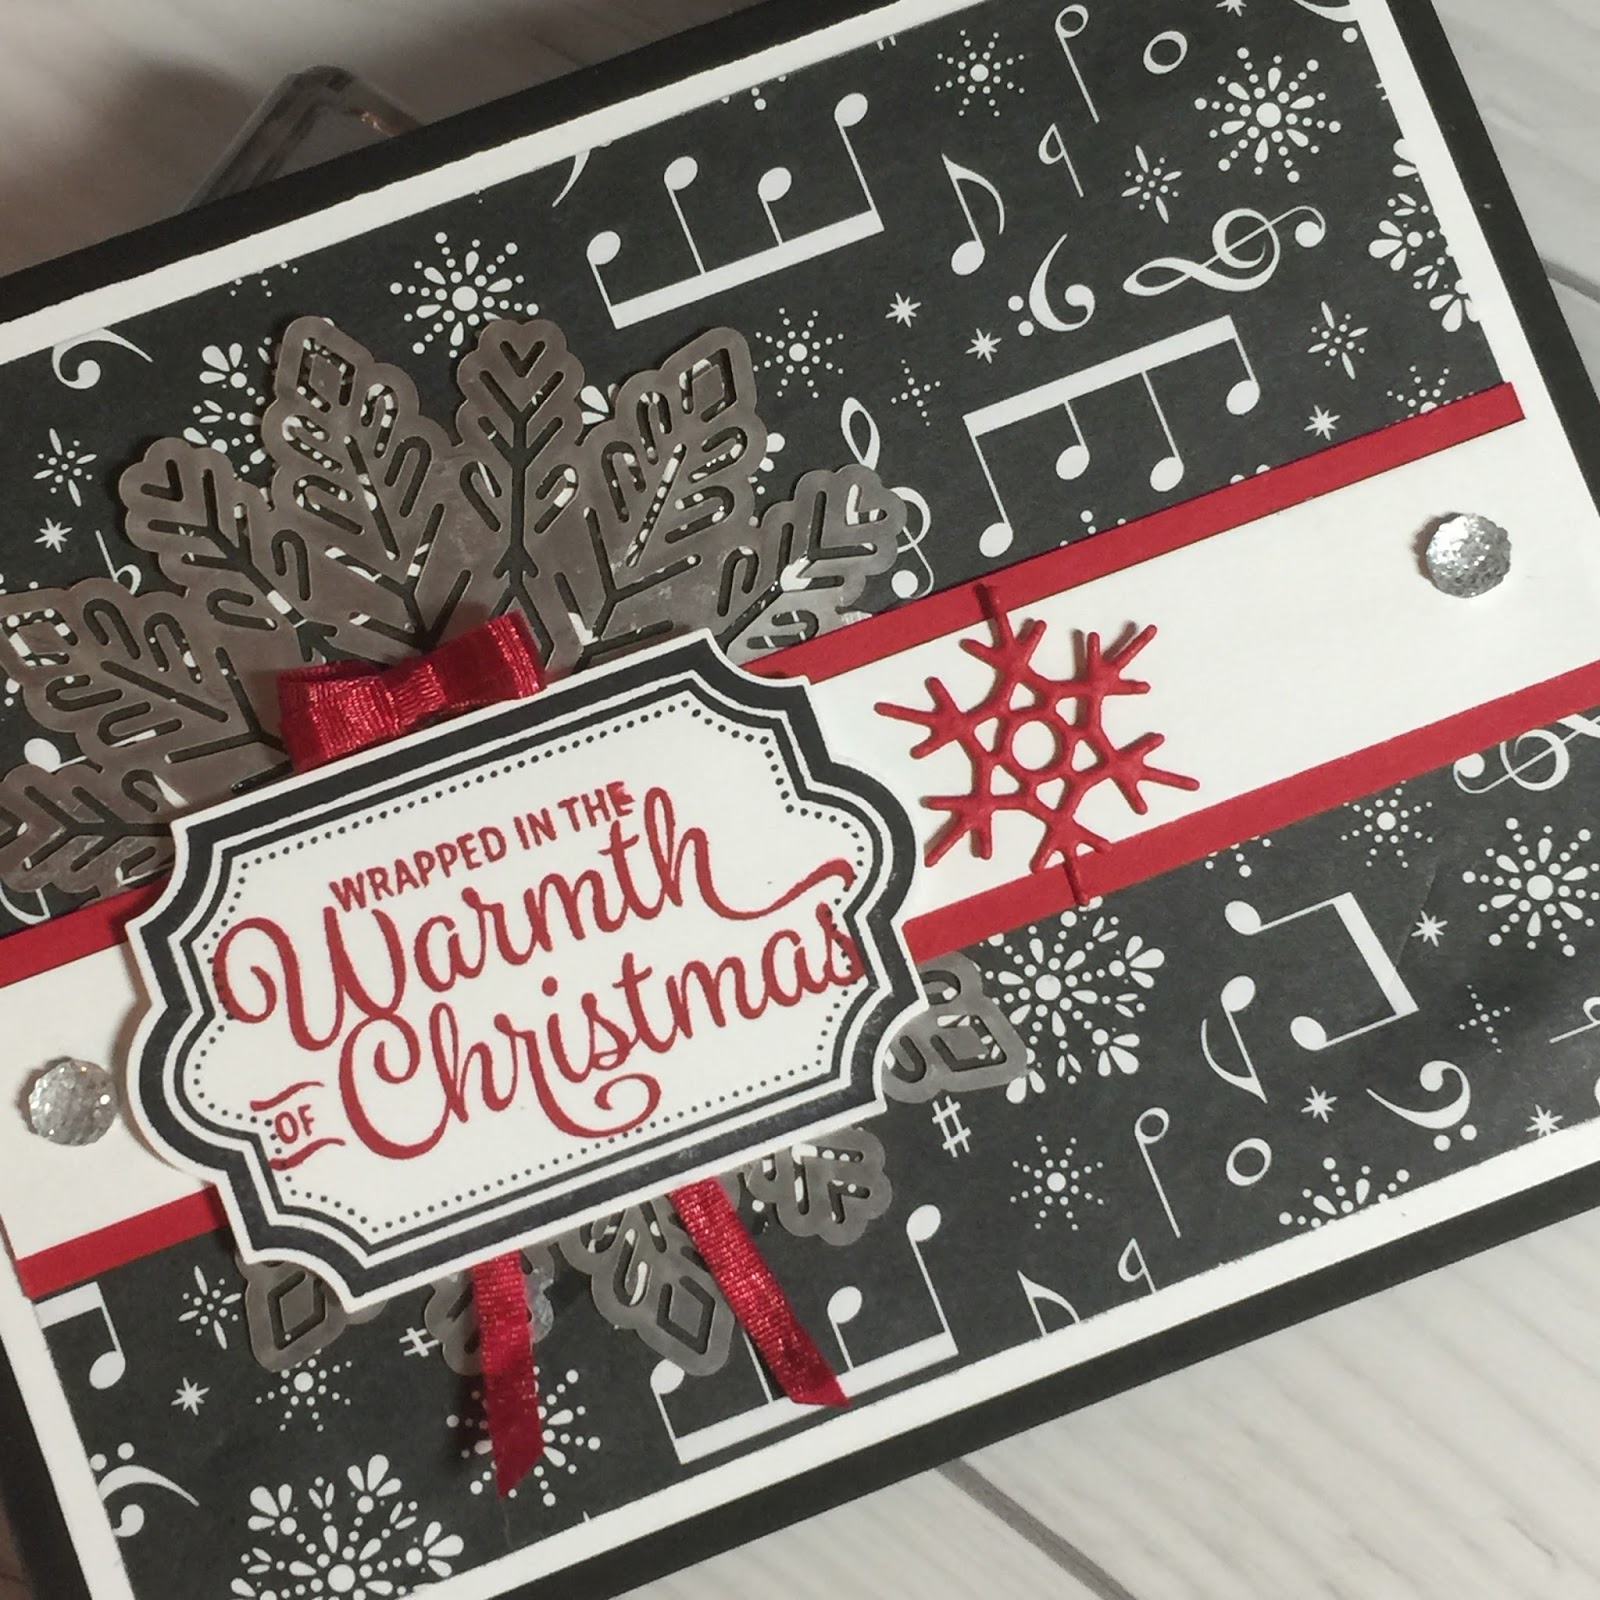 Stamped Sophisticates: Merry Music continues my Black & White Christmas Card Theme